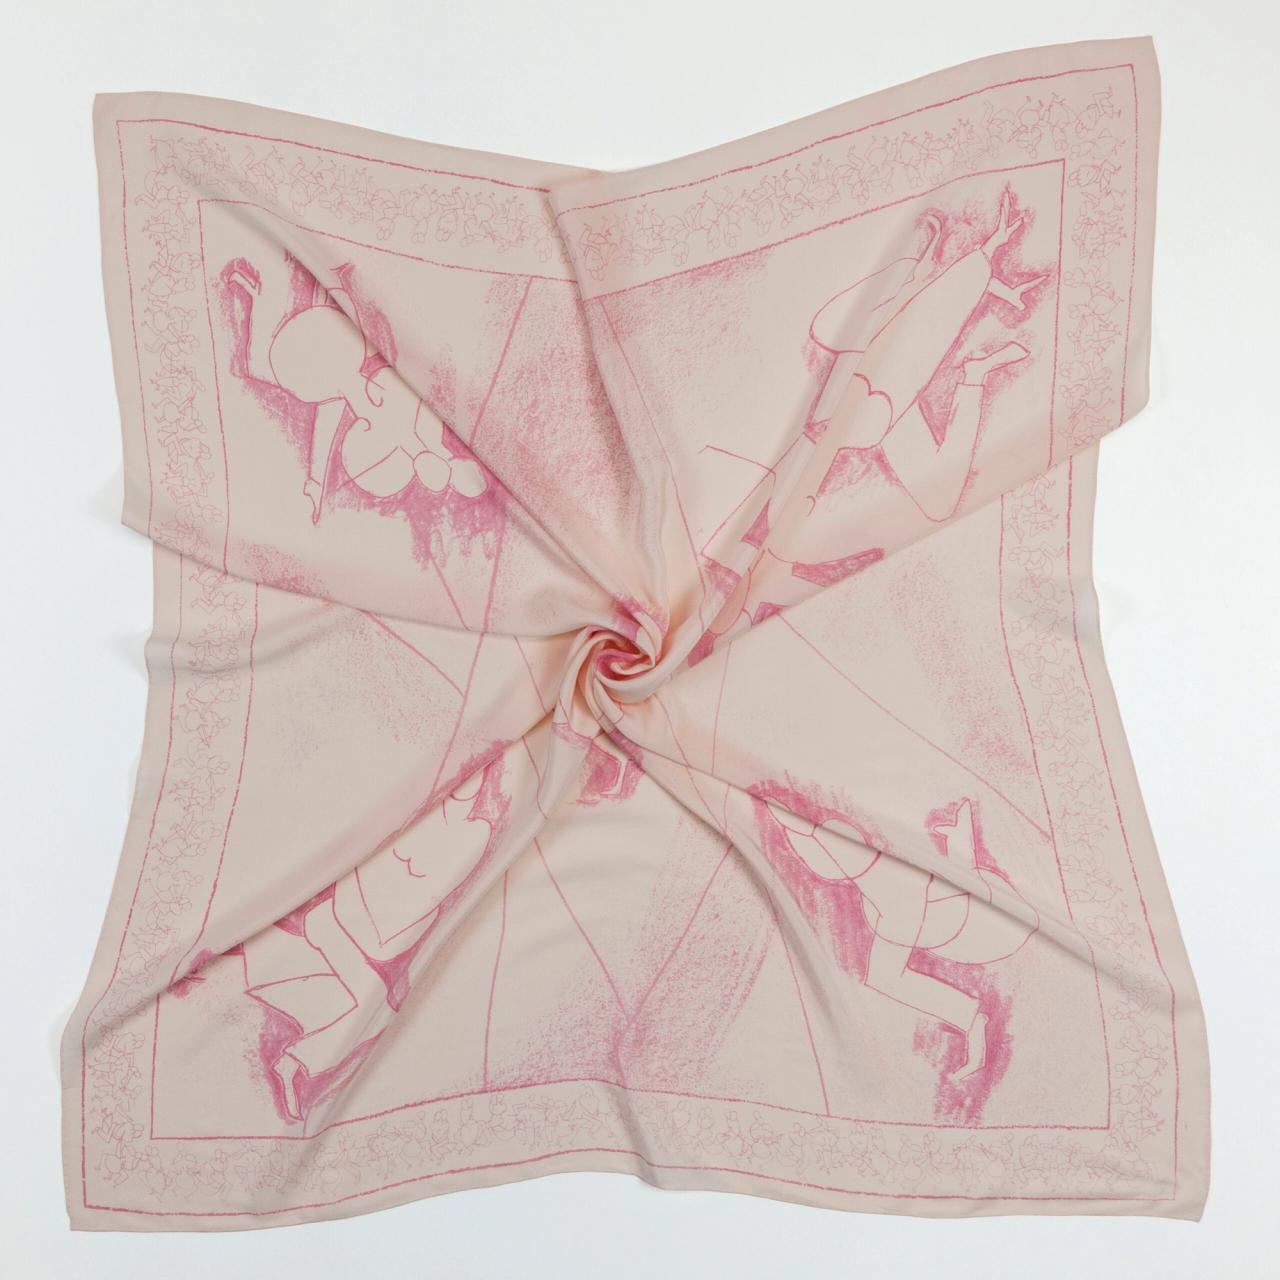 An image of a light pink scarf against a white background, but with the material twisted towards the center to show the light, silky structure of the fabric.